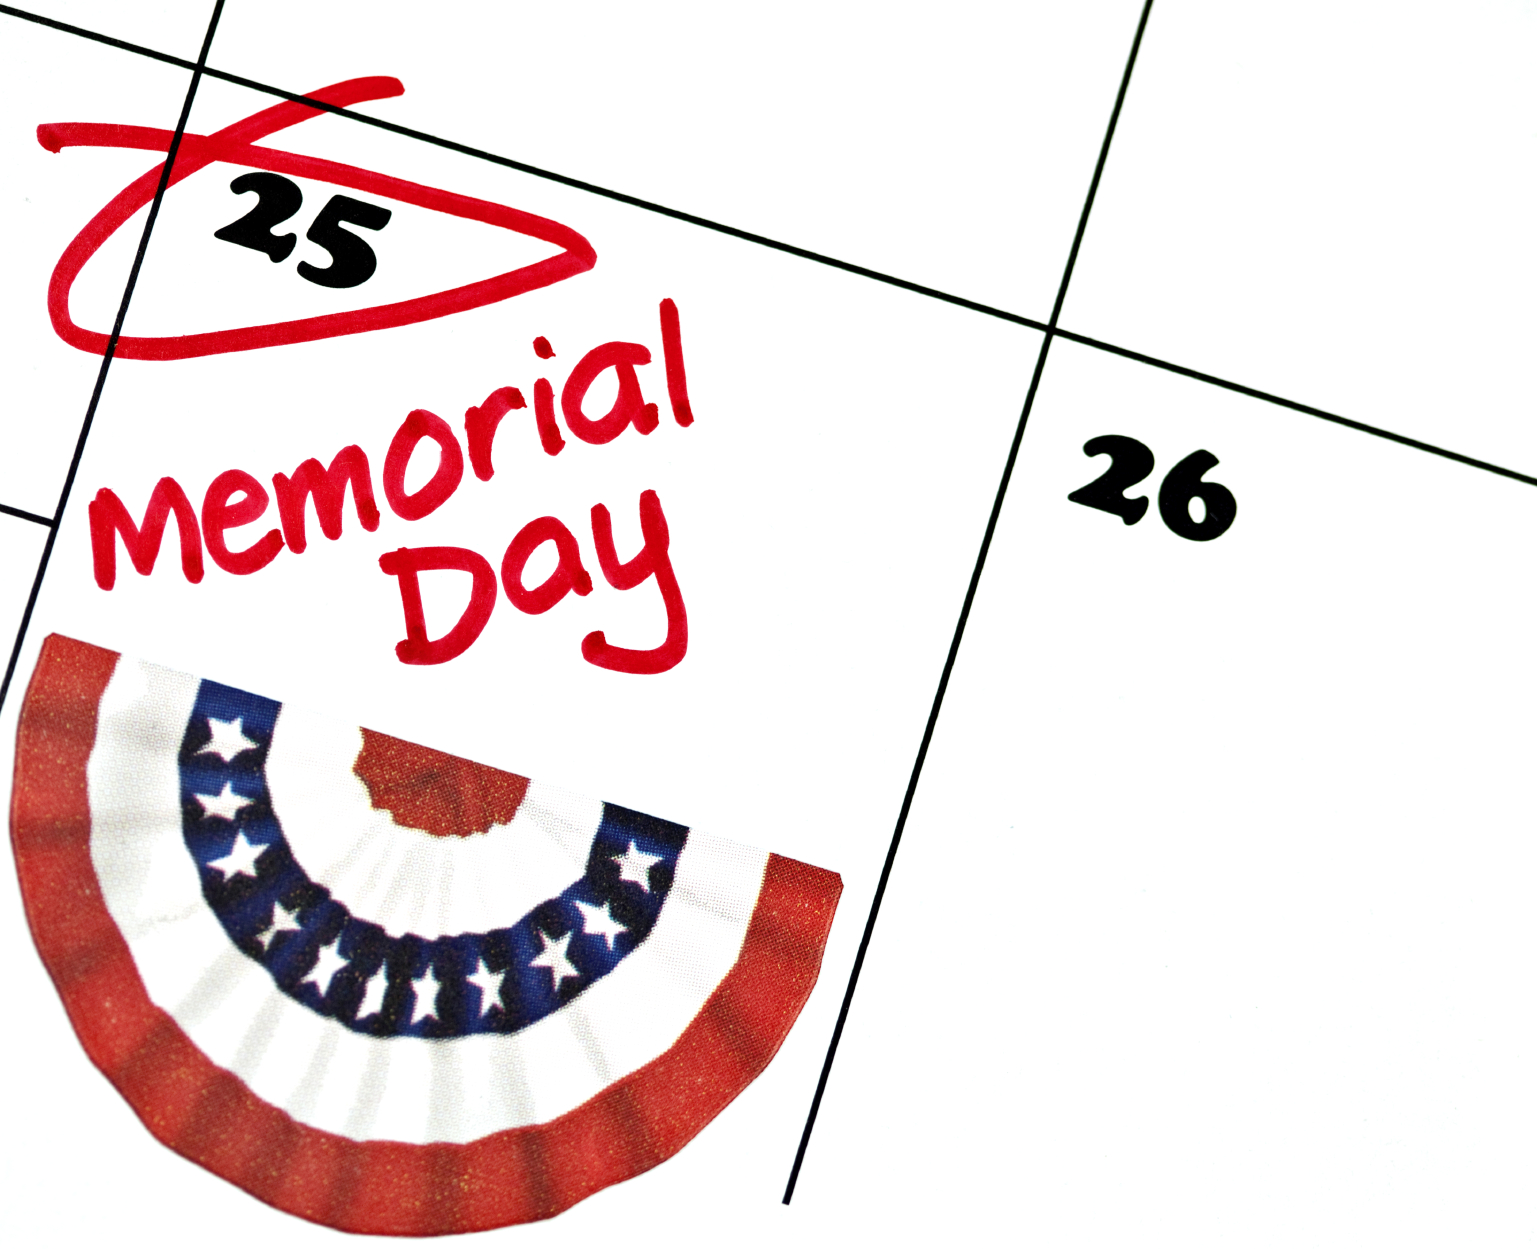 Free Memorial Day Pictures - ClipArt Best